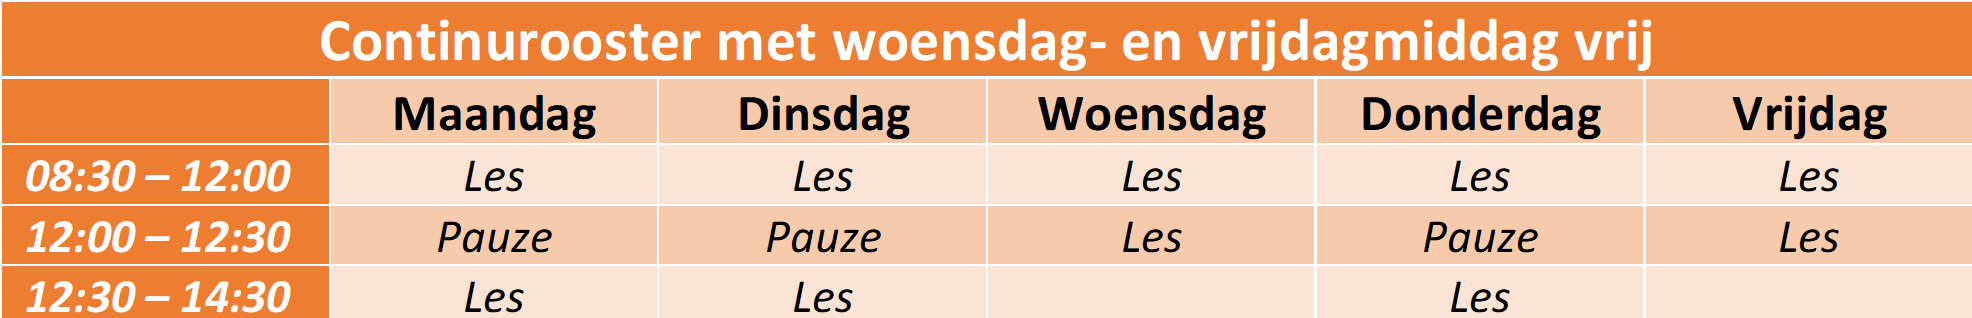 Continurooster